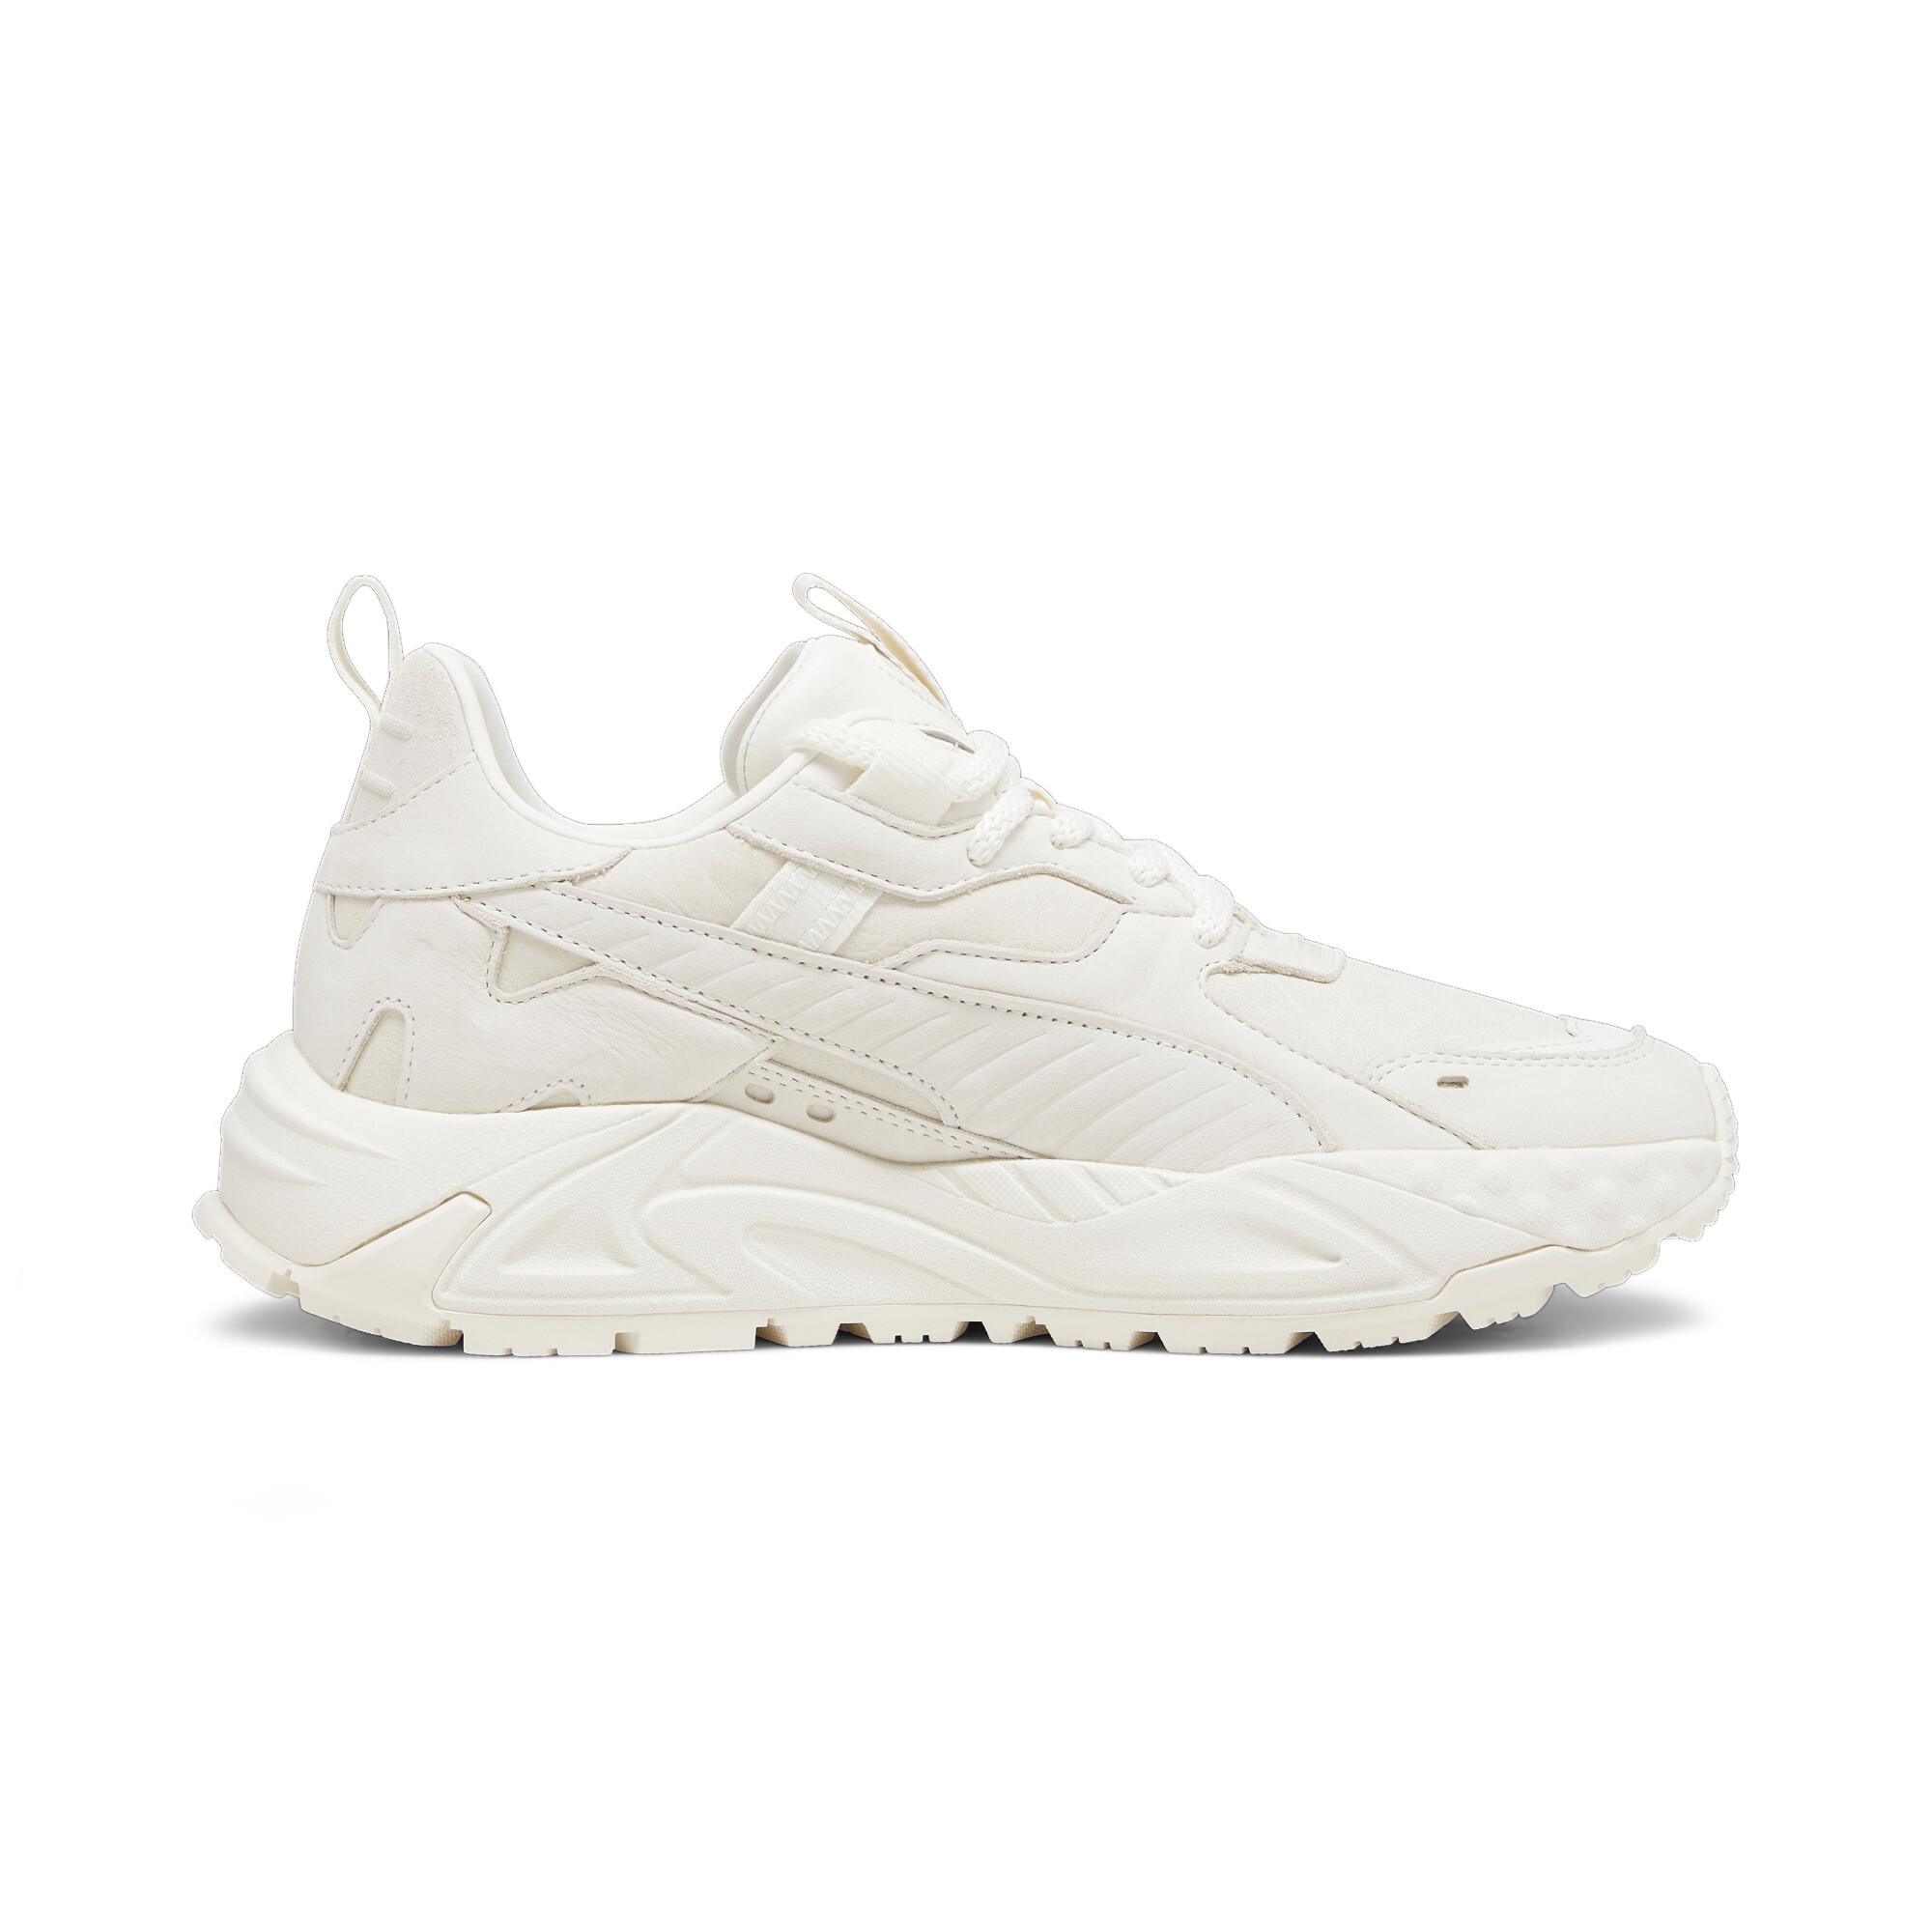 Puma RS-Trck Nubuck Sneakers, White, Size 37.5, Shoes